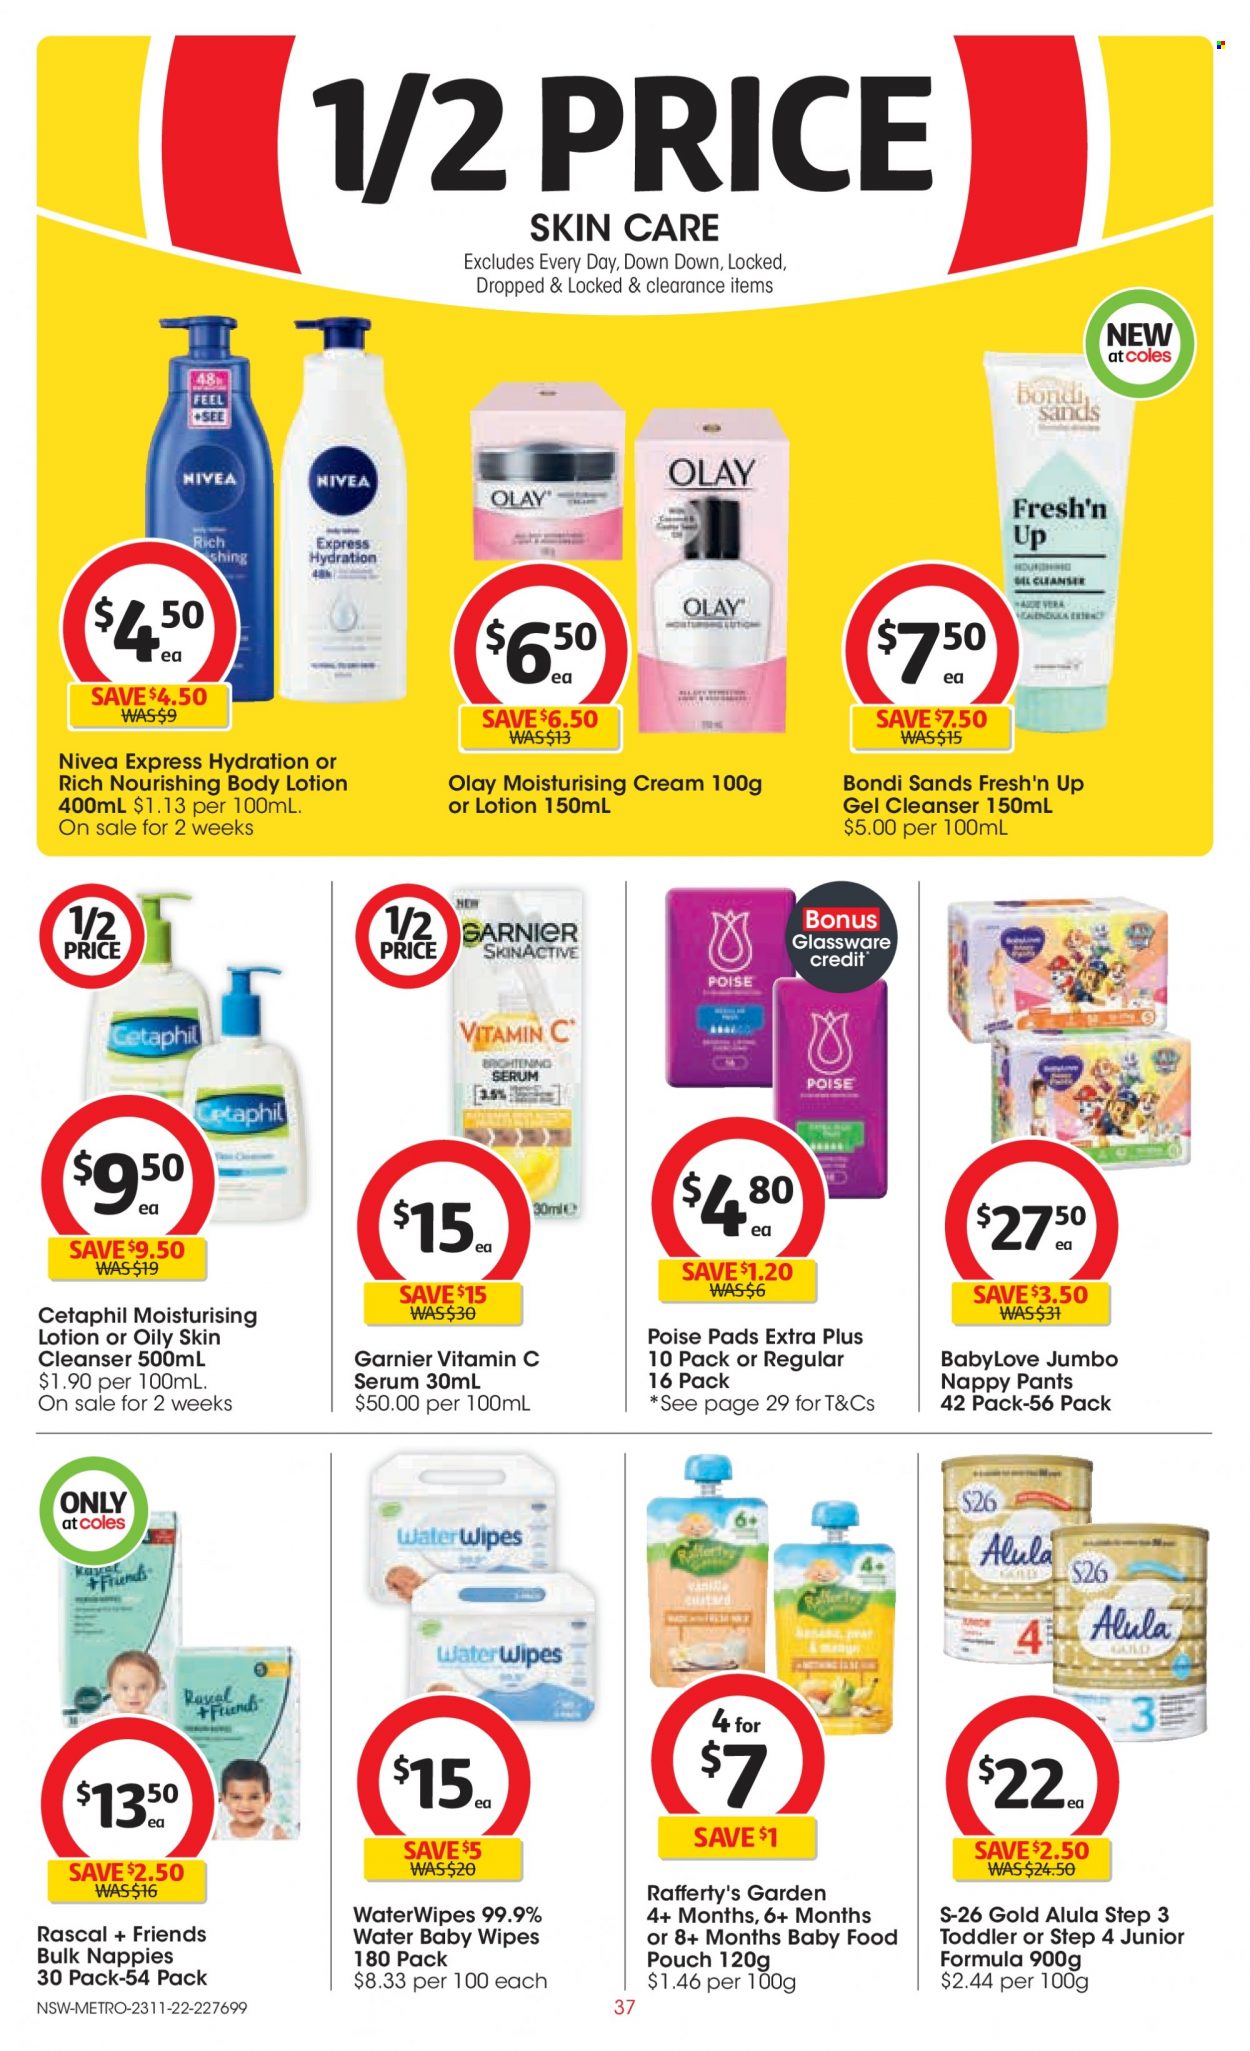 thumbnail - Coles Catalogue - 23 Nov 2022 - 29 Nov 2022 - Sales products - custard, baby food pouch, wipes, pants, baby wipes, nappies, BabyLove, Nivea, brightening serum, cleanser, Garnier, serum, Olay, Bondi Sands, body lotion, glassware set, plant seeds. Page 37.